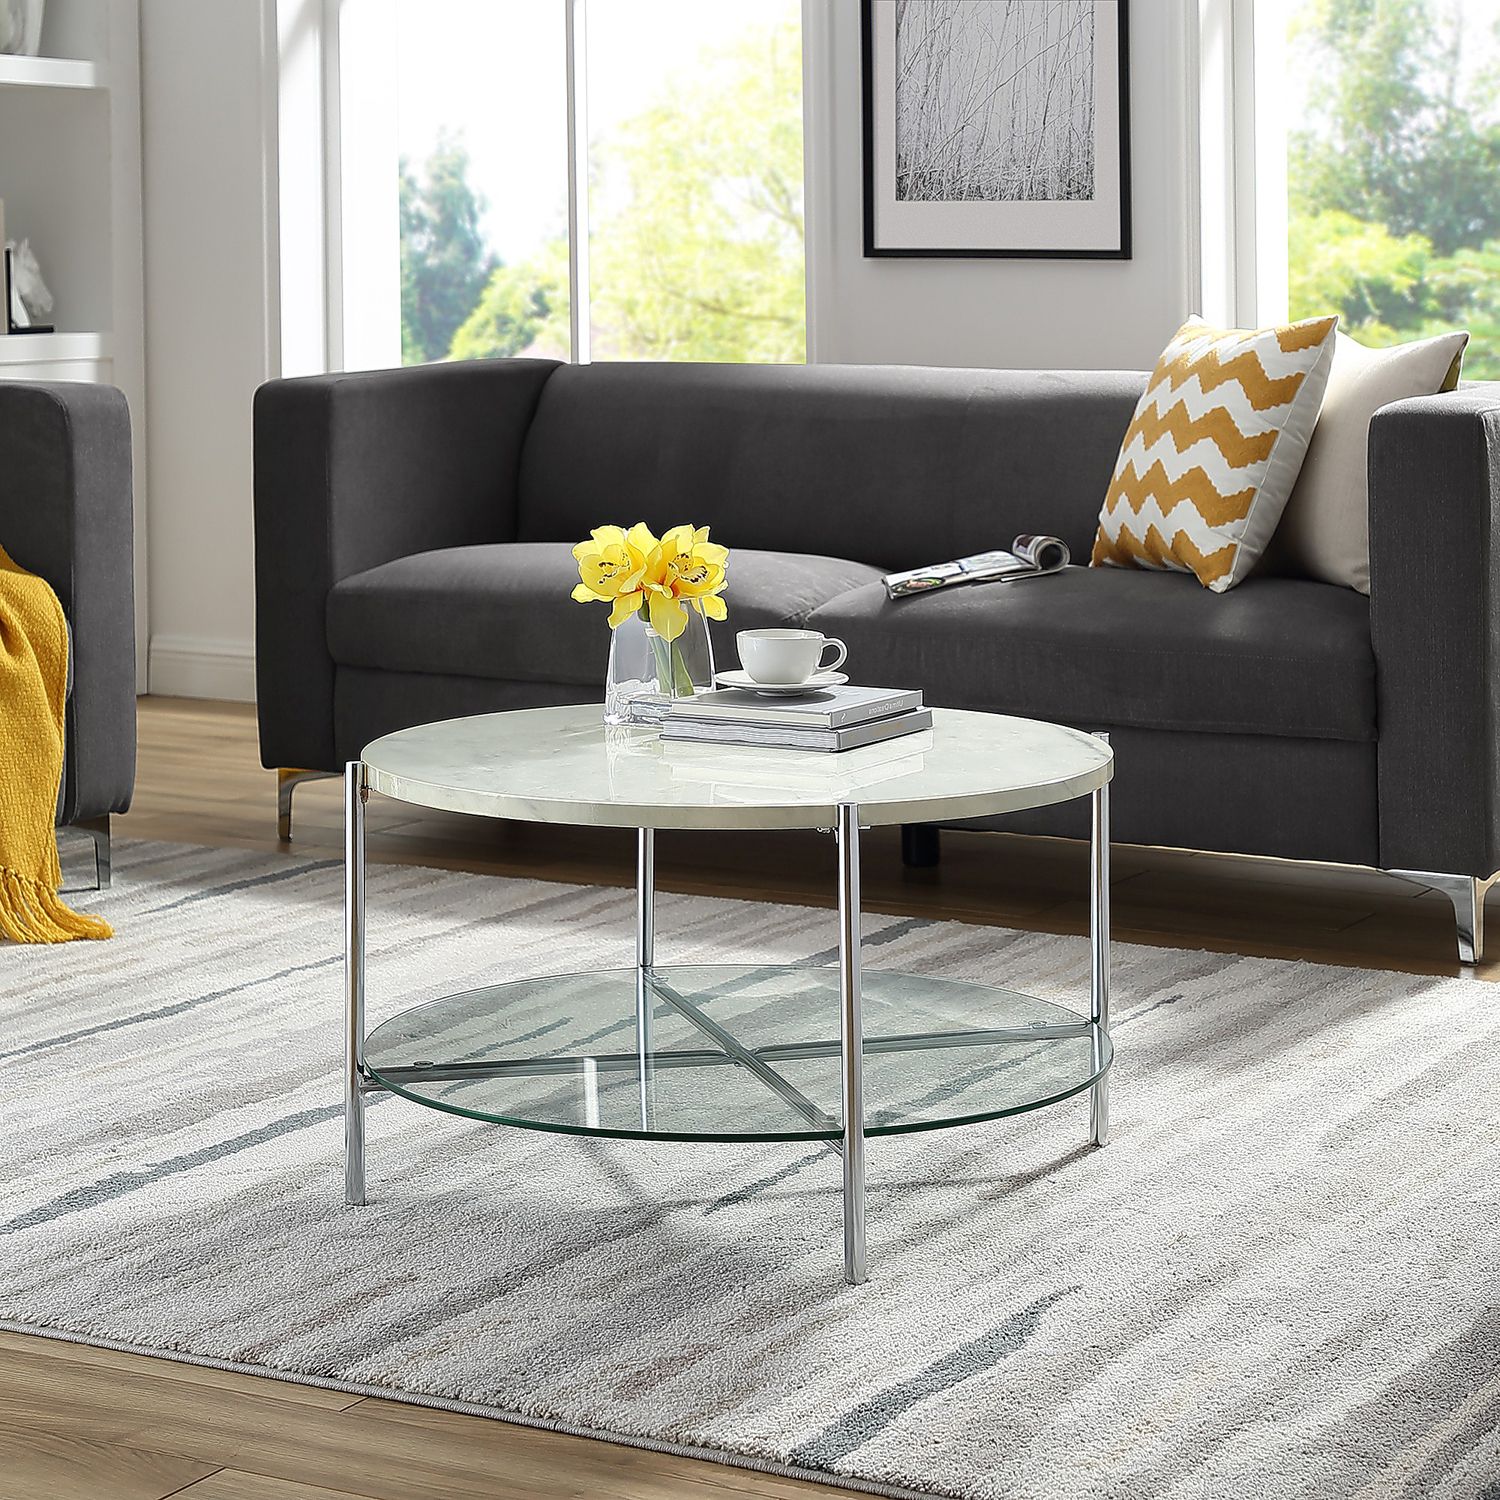 Best And Newest Faux Marble Round Coffee Table – Pier1 In Faux White Marble And Metal Coffee Tables (View 18 of 20)